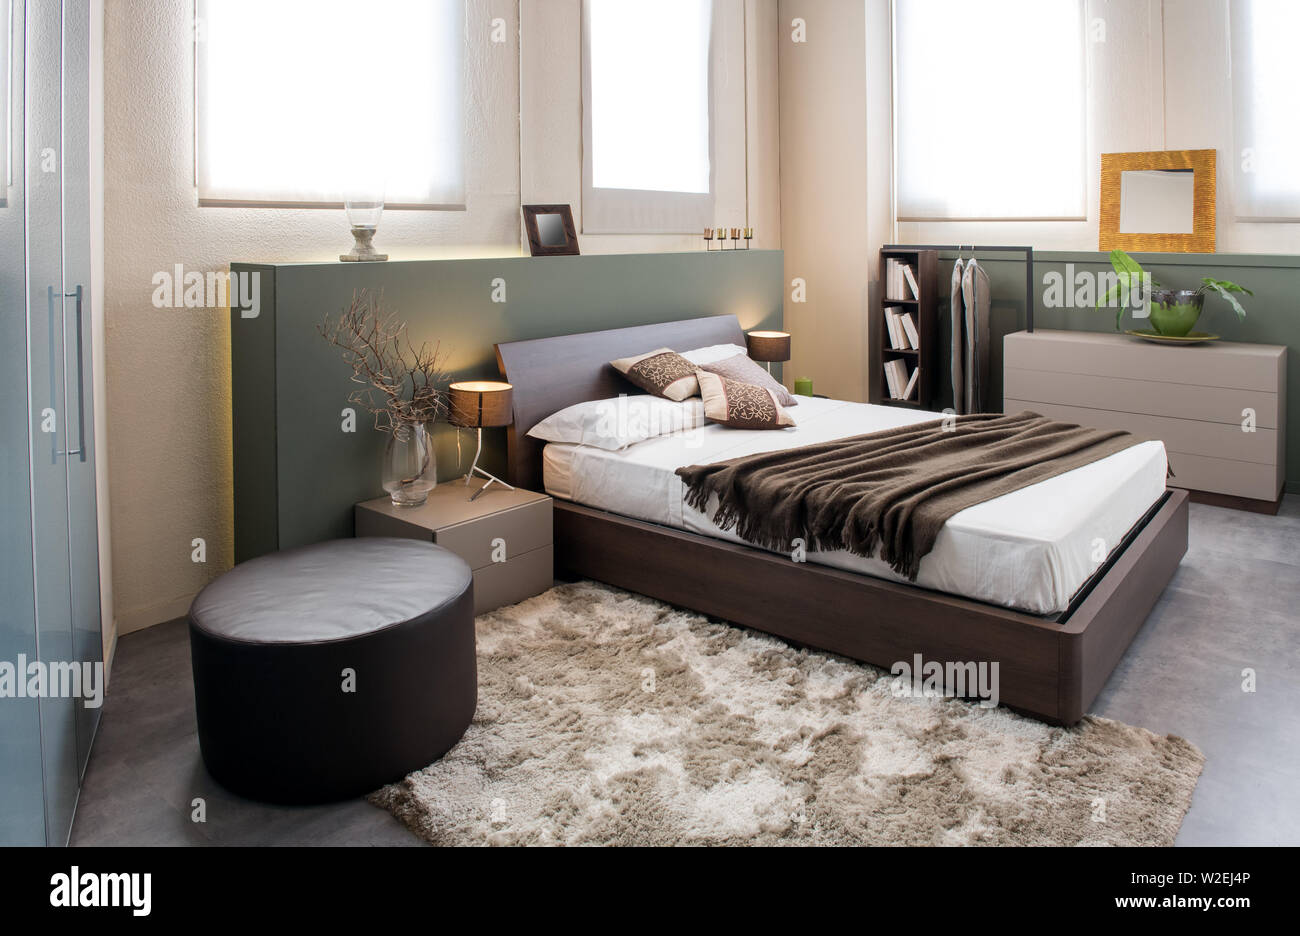 Modern luxury brown monochrome bedroom interior with large headboard above a double beds with cabinets, ottoman and built in wardrobe Stock Photo